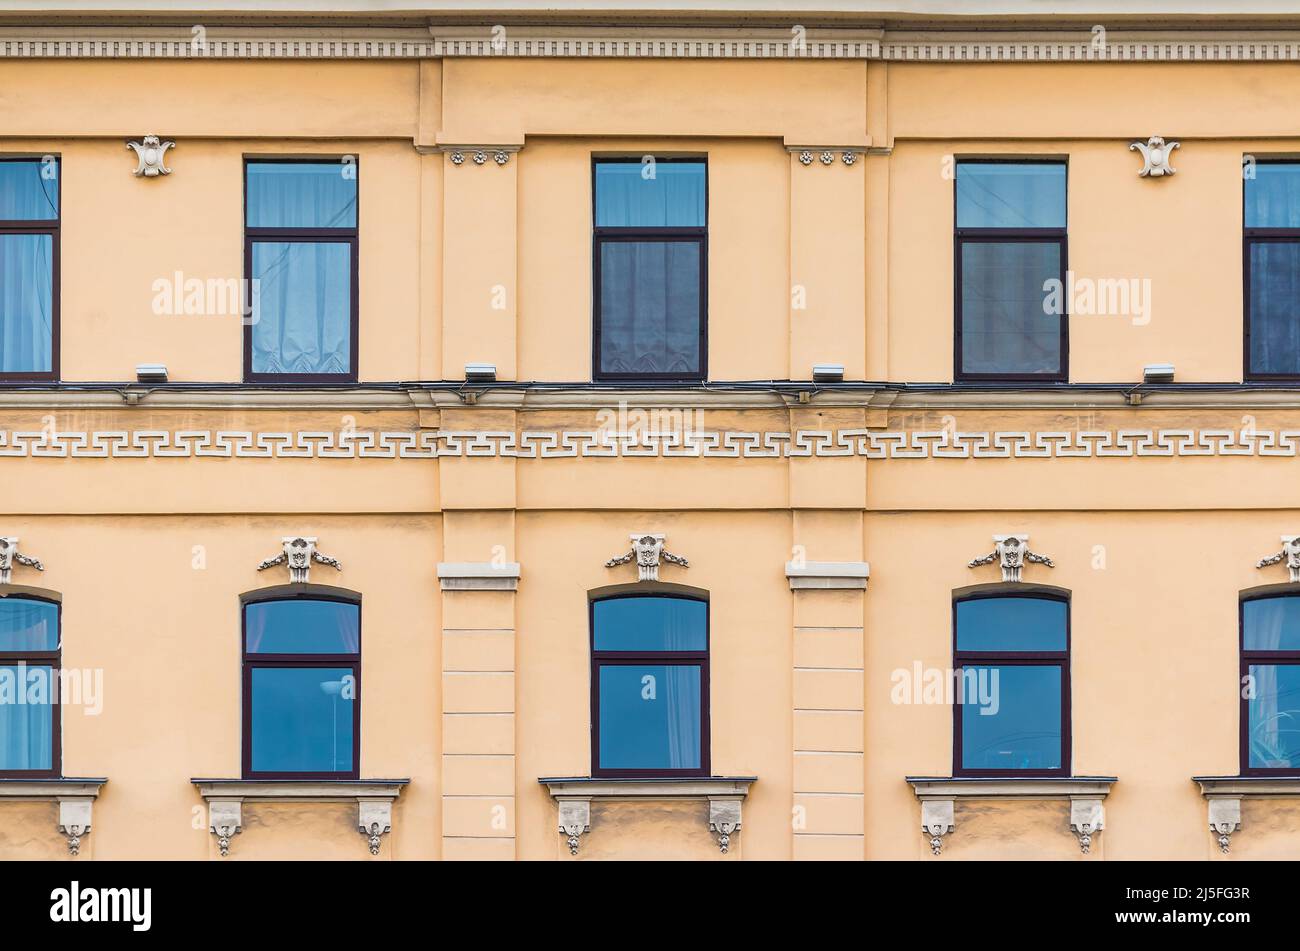 Many windows in a row on the facade of the urban historic apartment building front view, Saint Petersburg, Russia Stock Photo